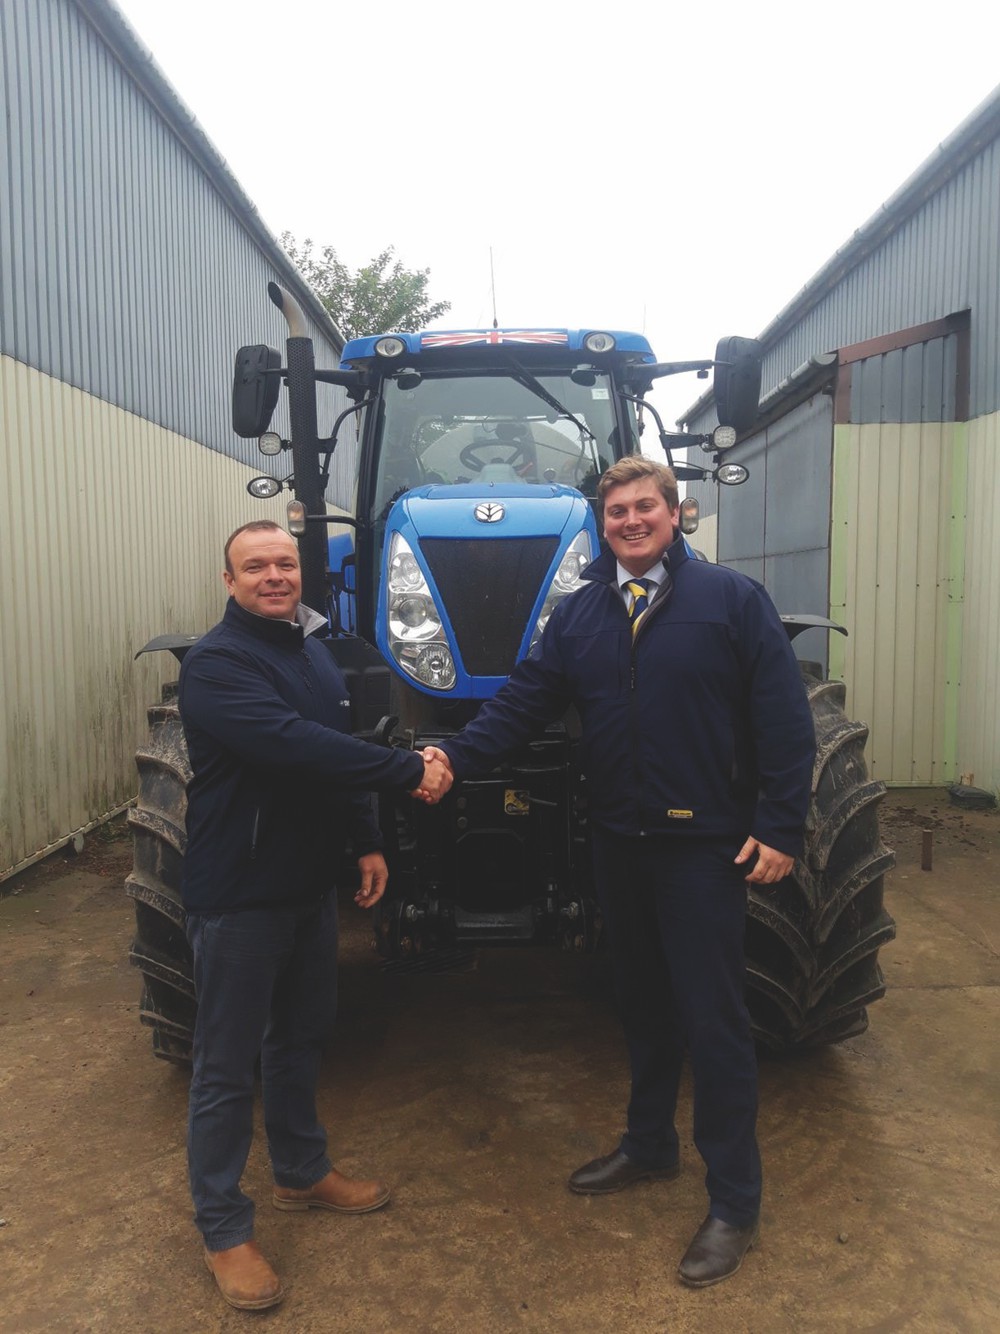 David Evans is welcomed to New Holland by George Mills, New Holland Area Sales Manager.